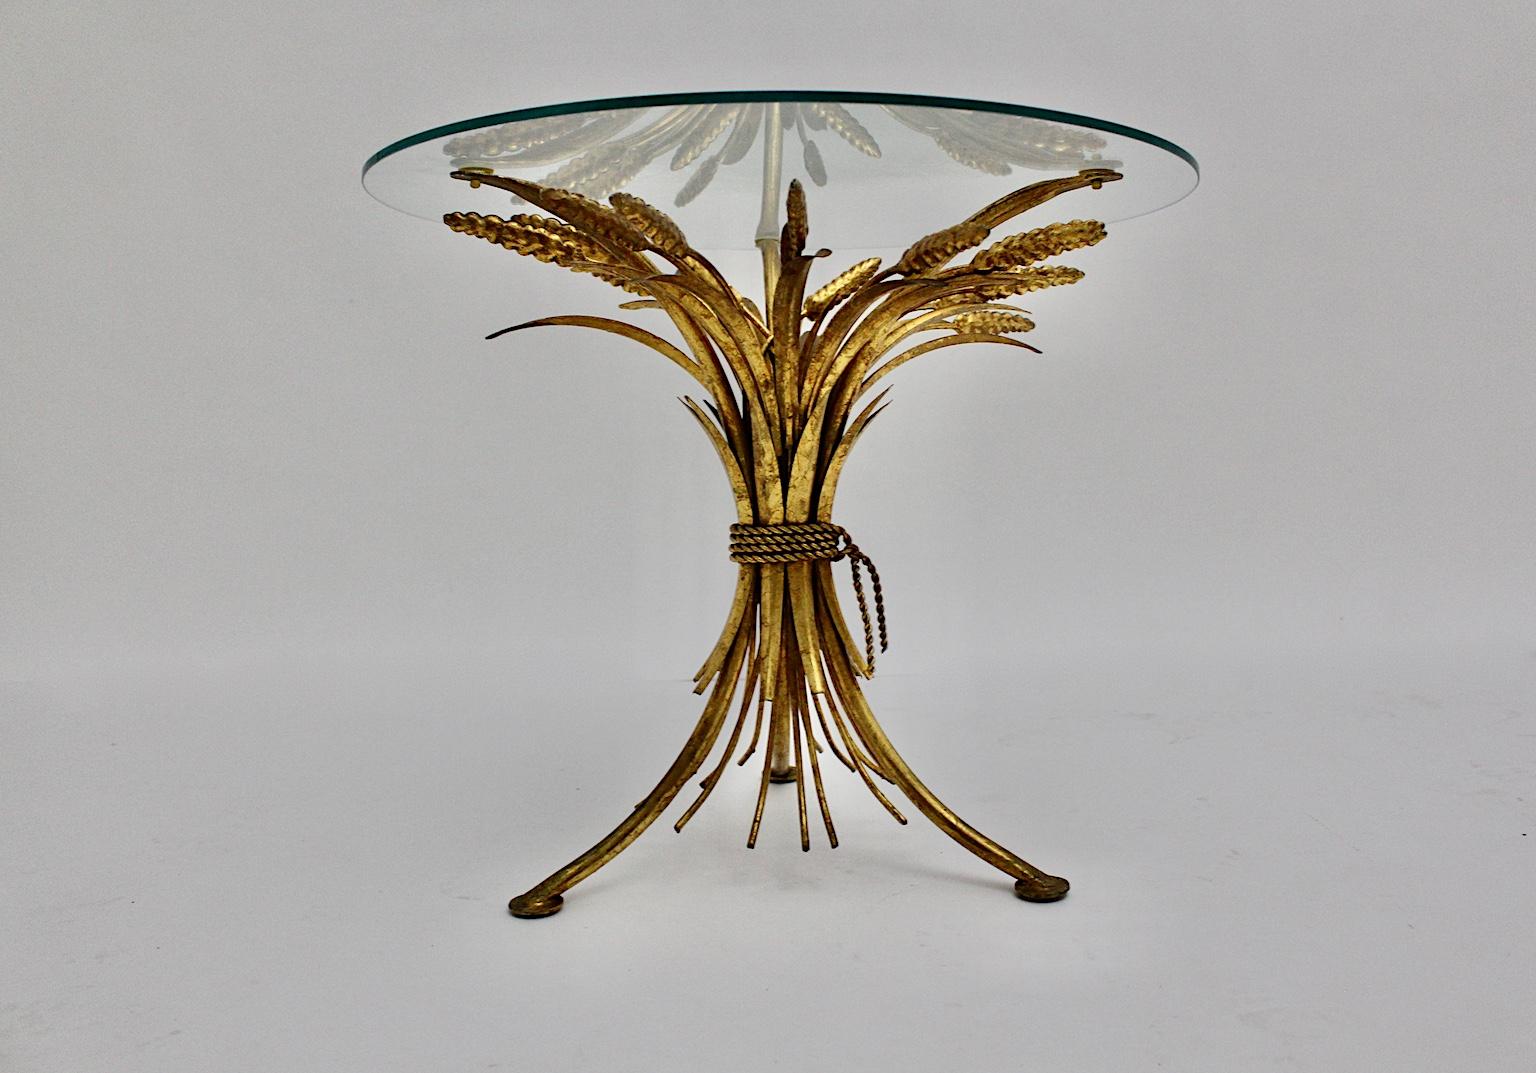 Hollywood regency Style gold vintage coffee table or side table designed and executed France 1970s.
Inspired by nature the designer of the small, amazing, gilded coffee table created a gilded steel base in sheaf of wheat form and a clear round glass